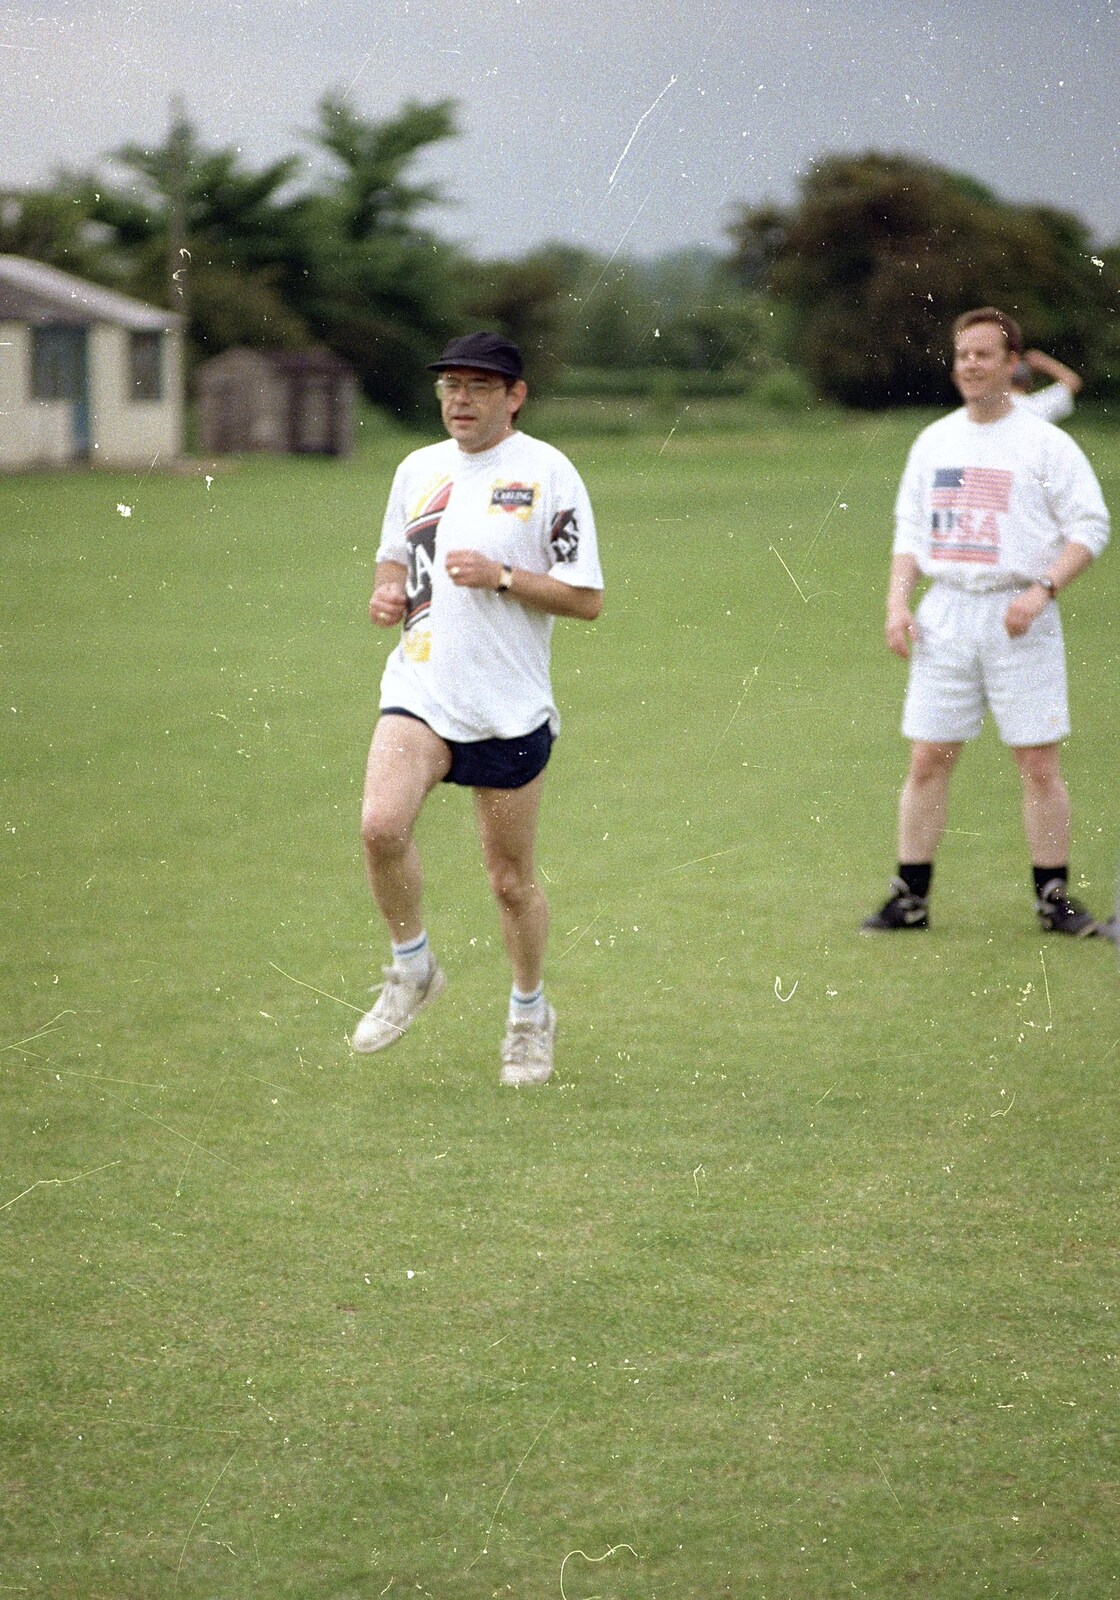 Clays Softball and Printec Reunion, Ditchingham and Stoke Ash, Suffolk - 2nd June 1994: Warming up for the innings